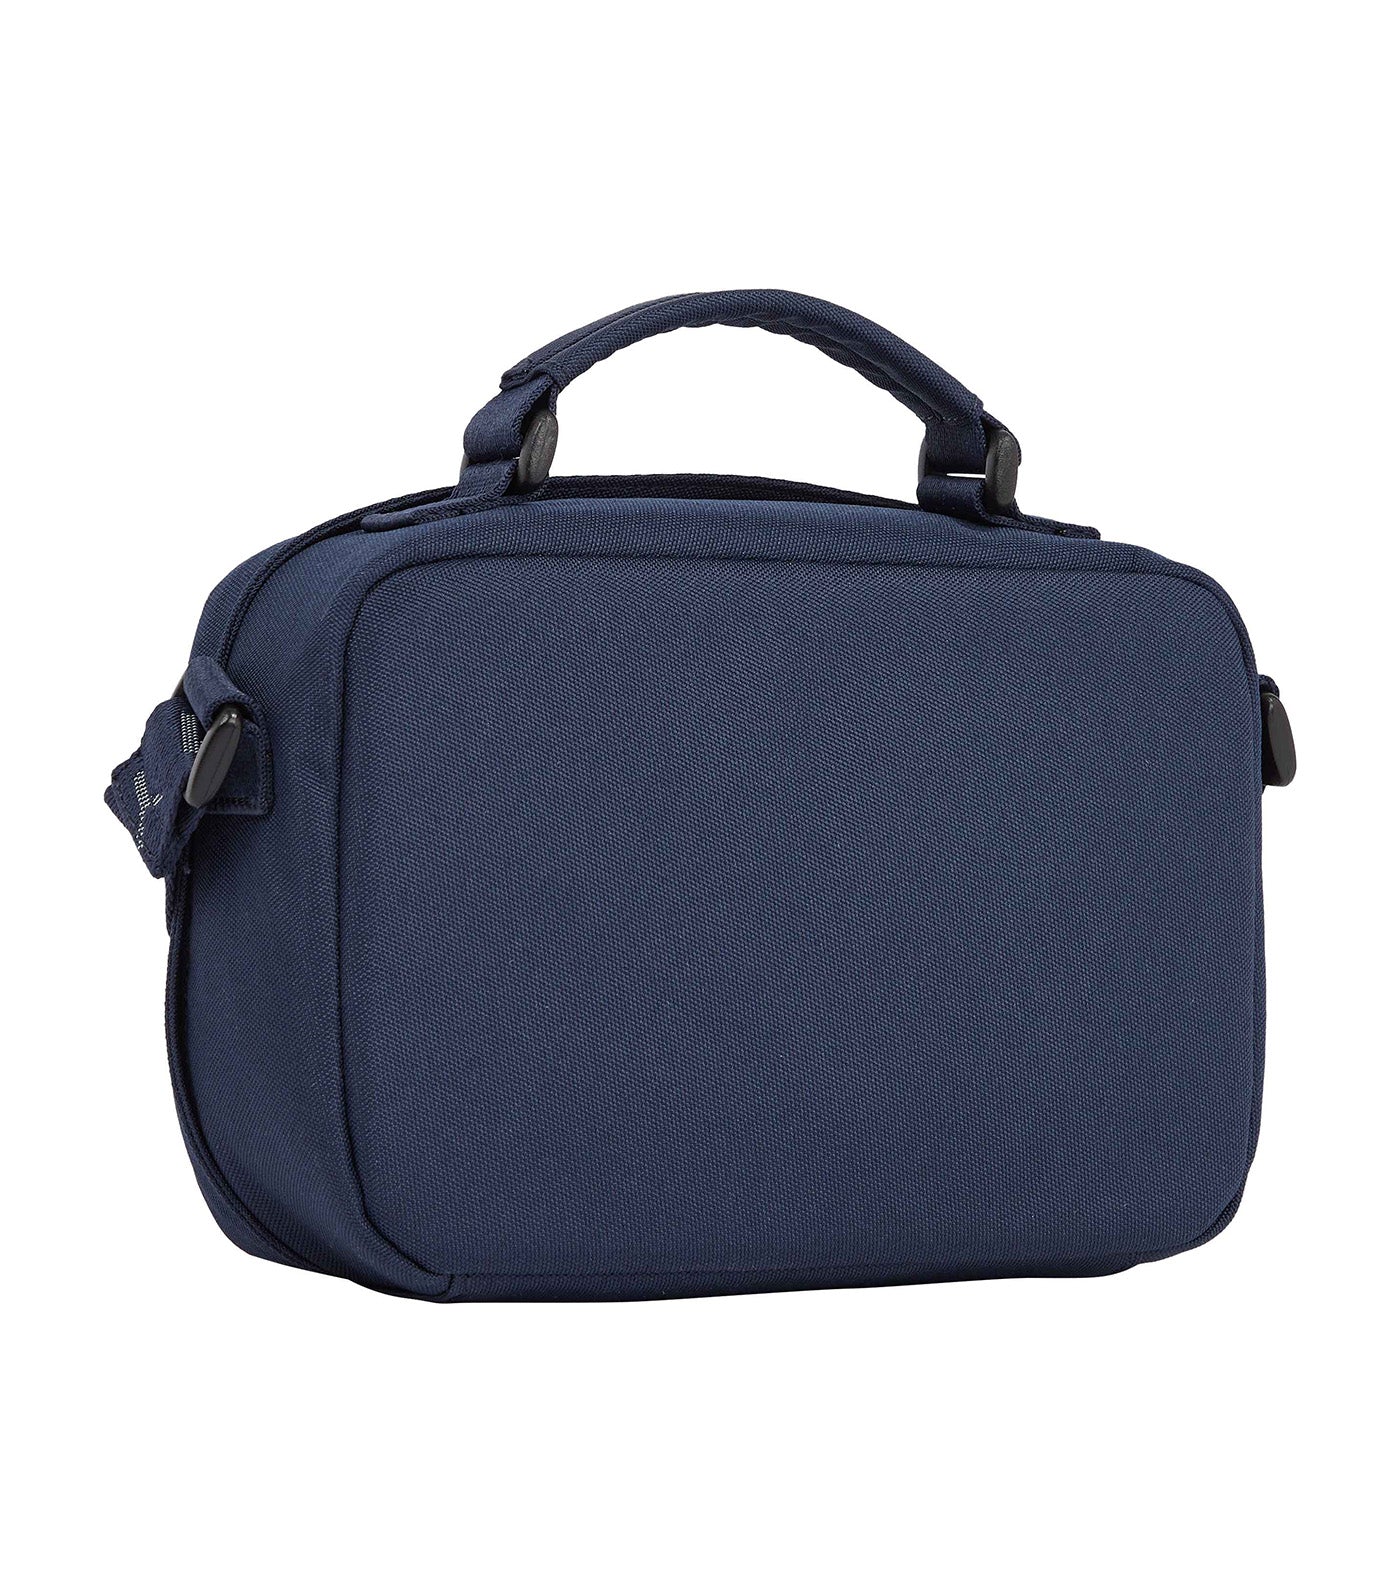 Men's Gifting Crossover Bag Corporate